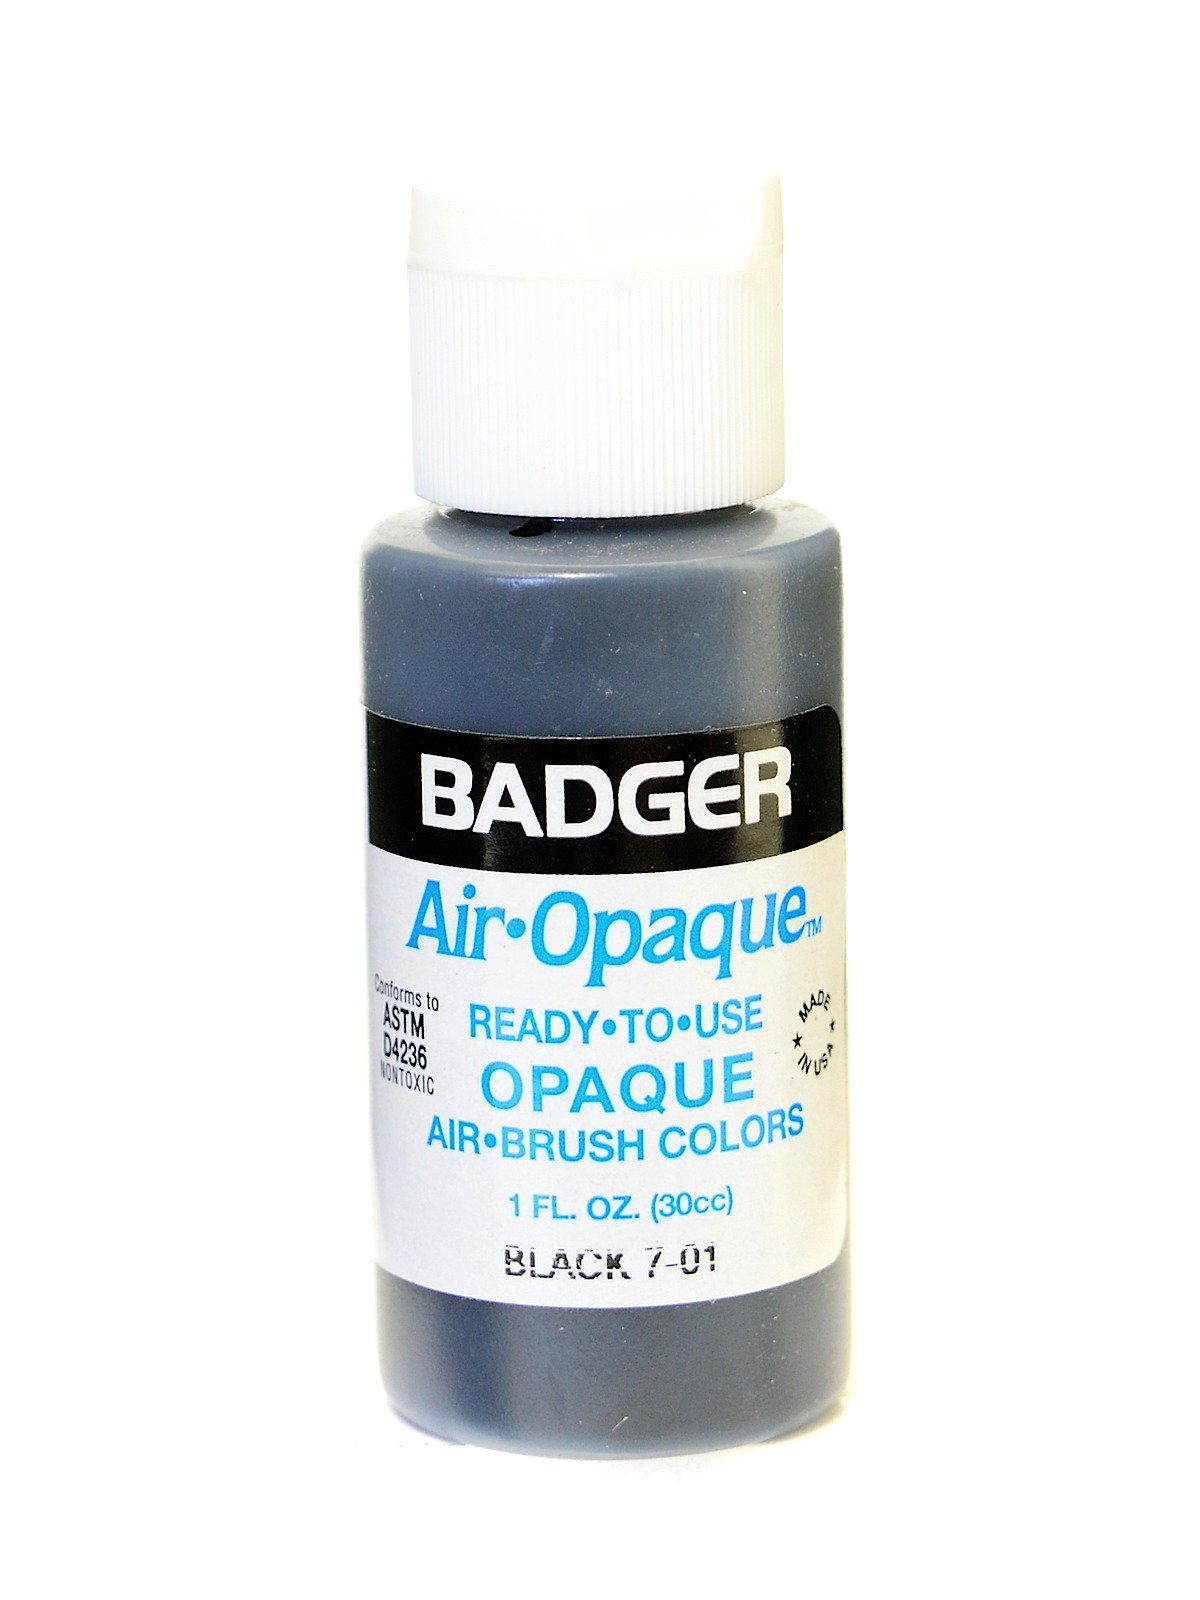 Badger Air-Brush Company Air-Opaque Airbrush Ready Water Based Acrylic Paint White 4-Ounce